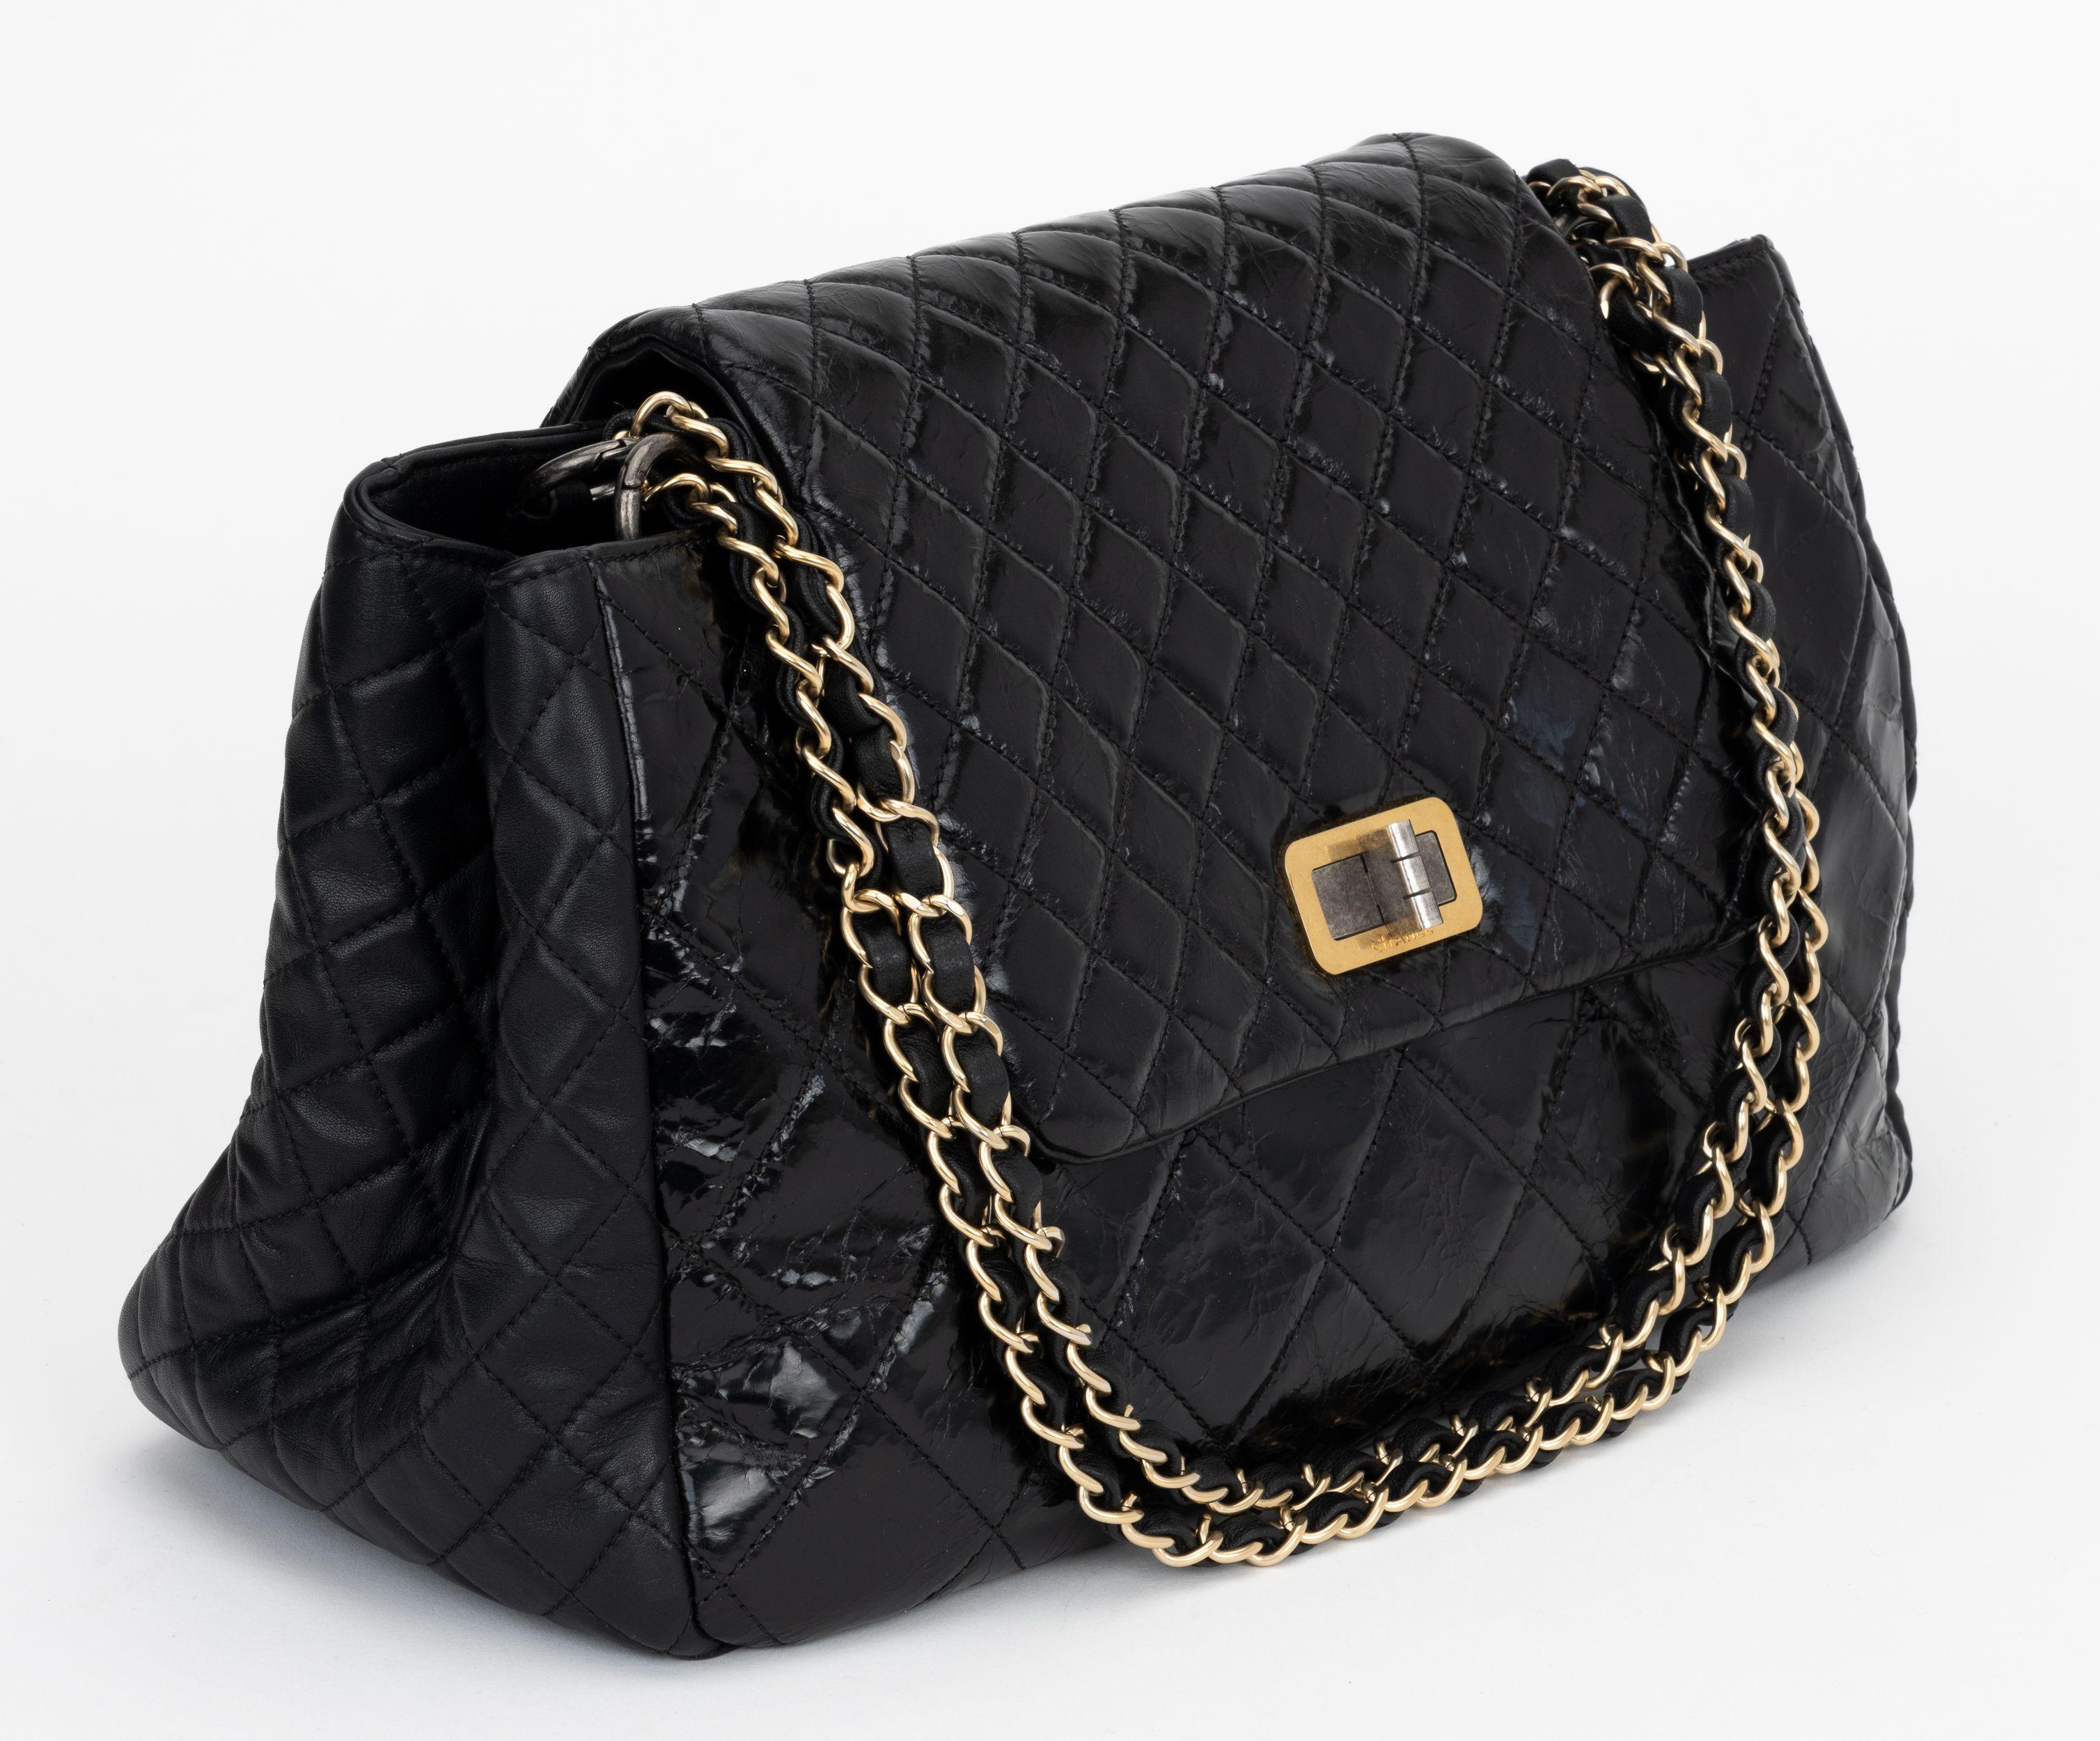 Chanel mixed leather black handbag in patent leather and soft lambskin with two-tone metal hardware Drop 9.5